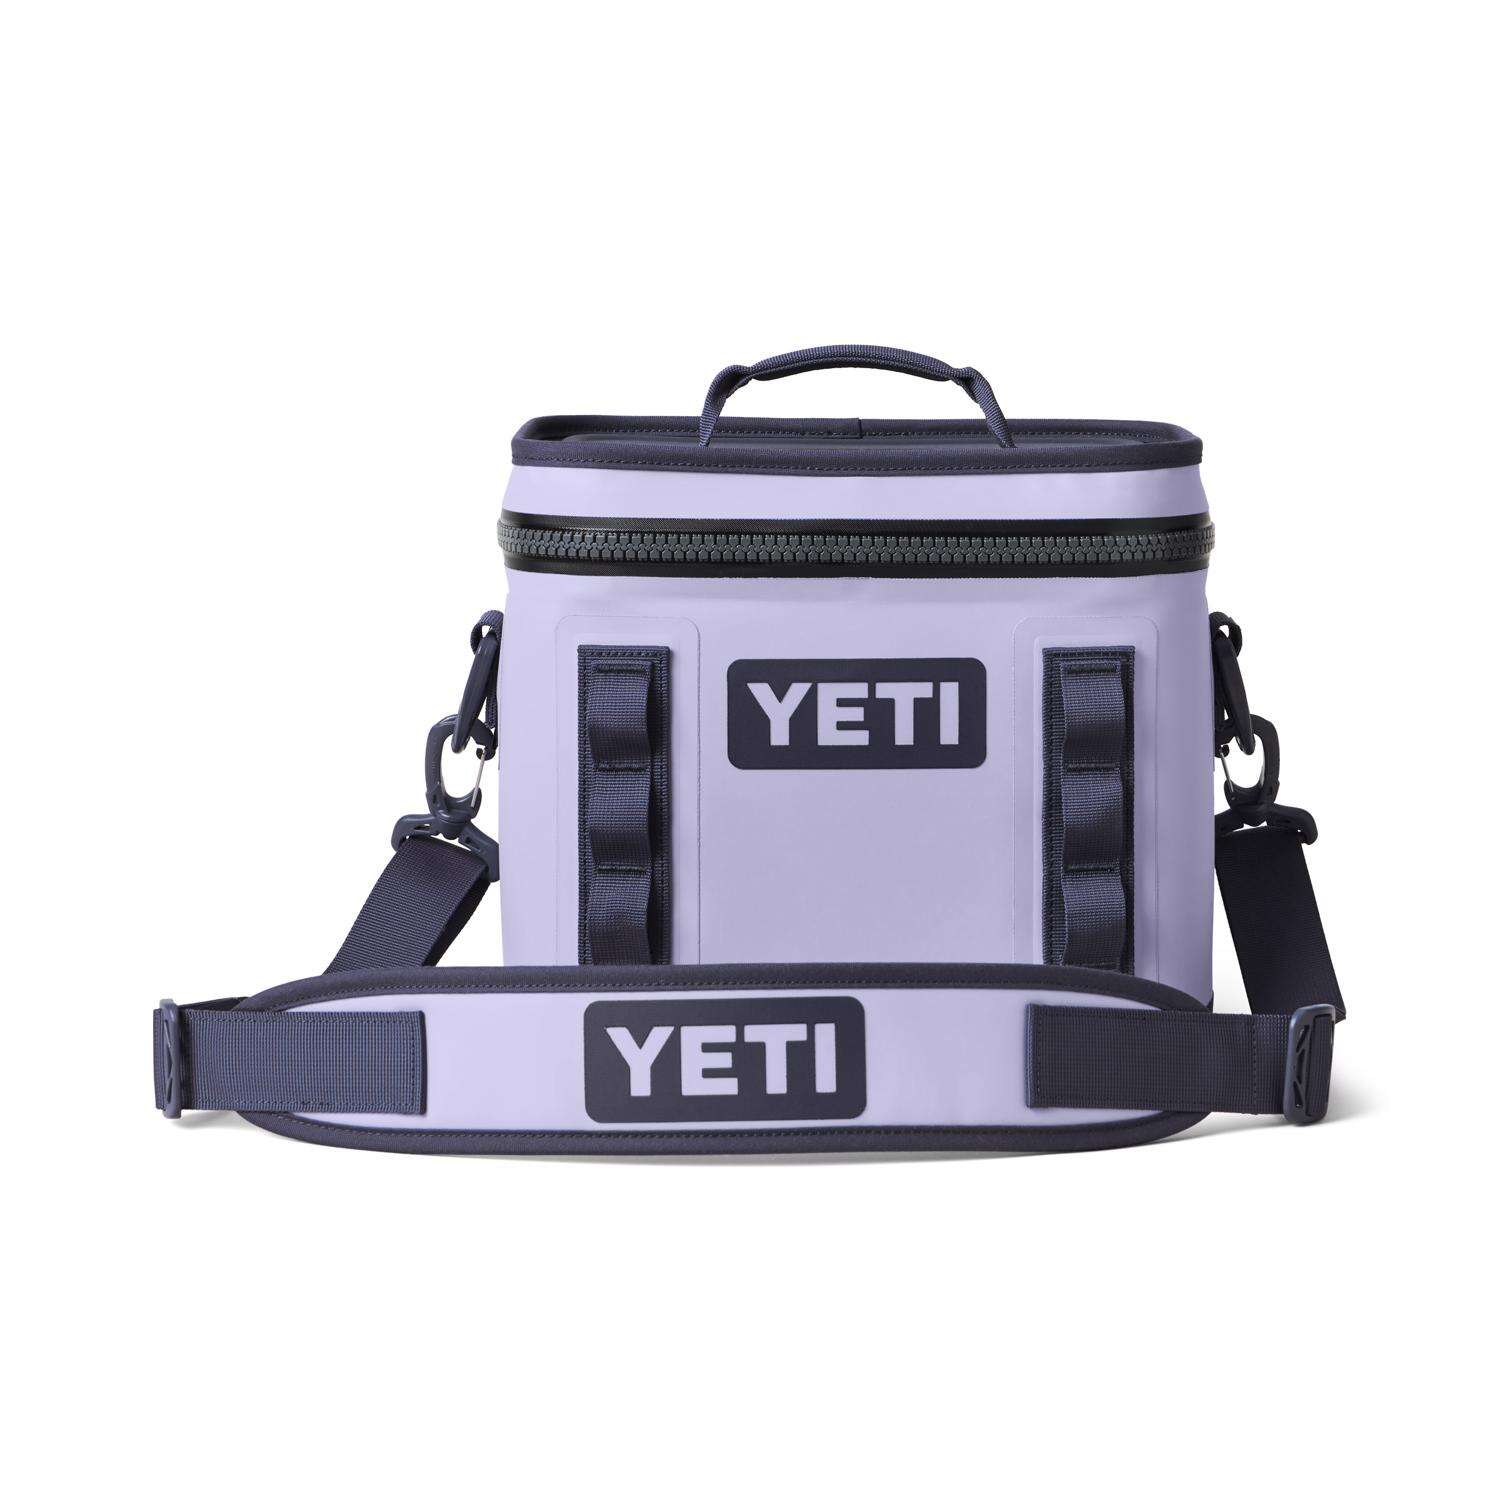 YETI Hopper Flip 18 Portable Cooler, Coral - Camping Coolers